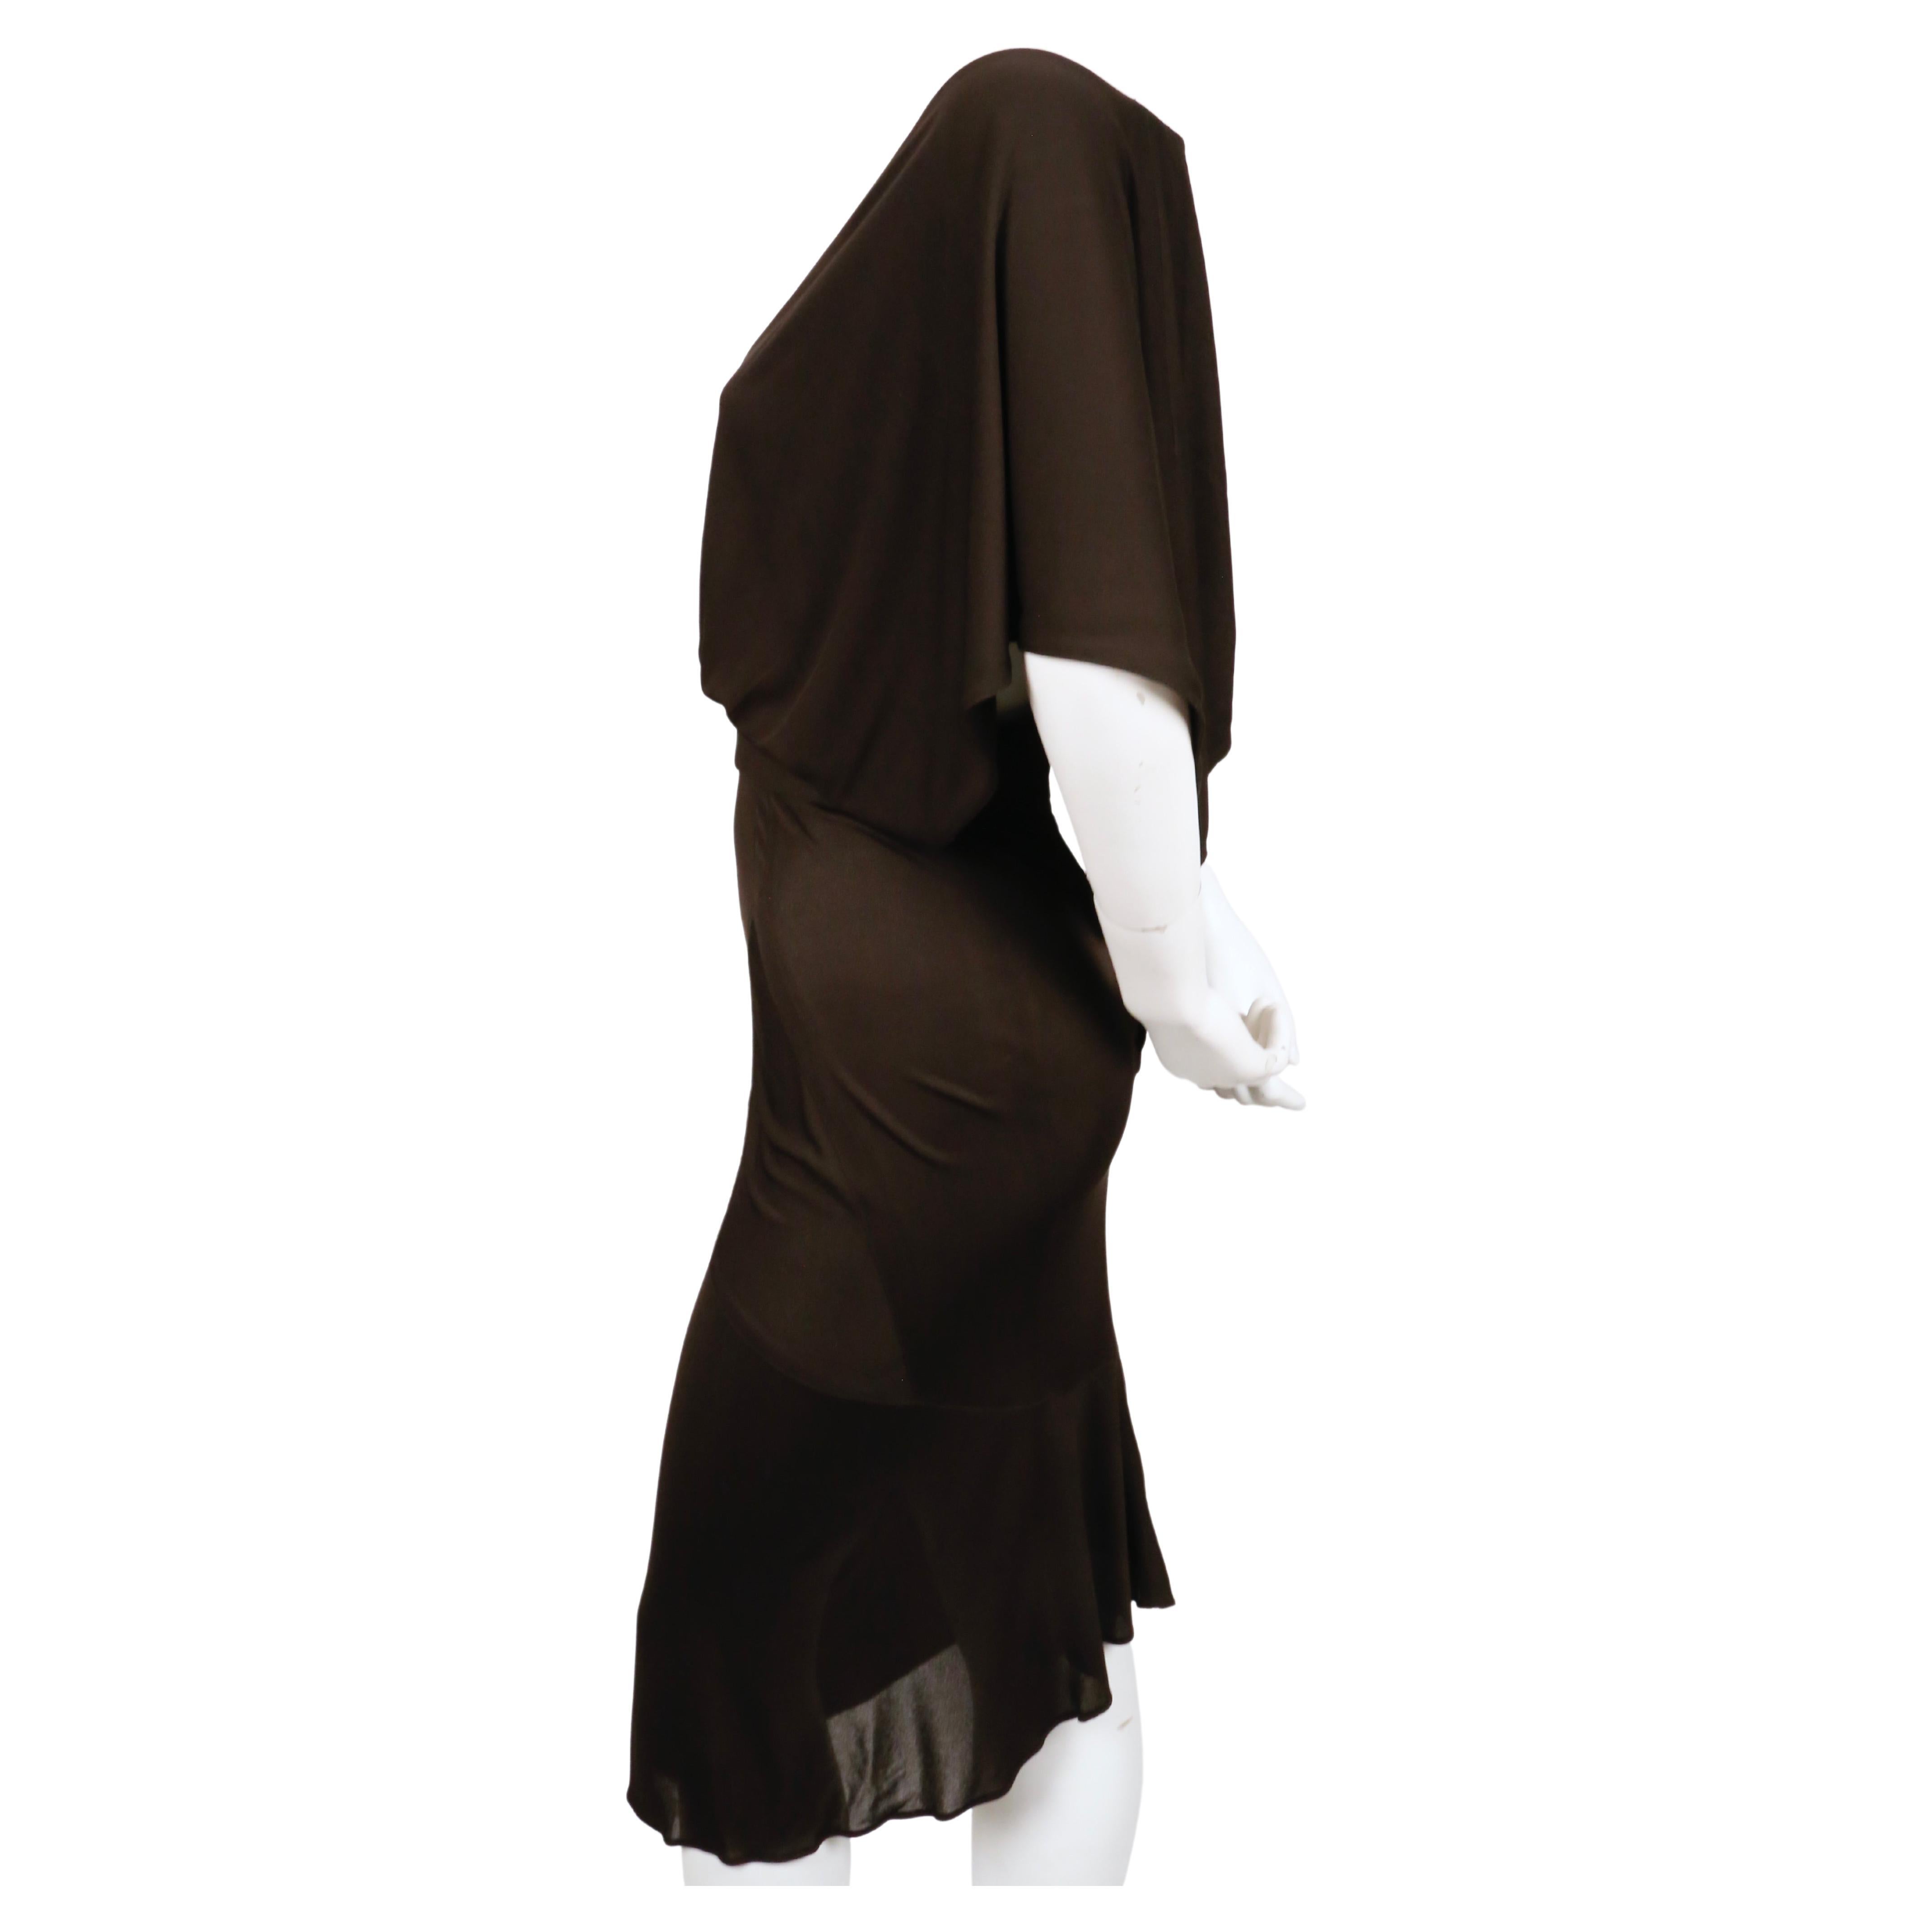 very rare 1984 AZZEDINE ALAIA iconic hooded jersey dress For Sale 3